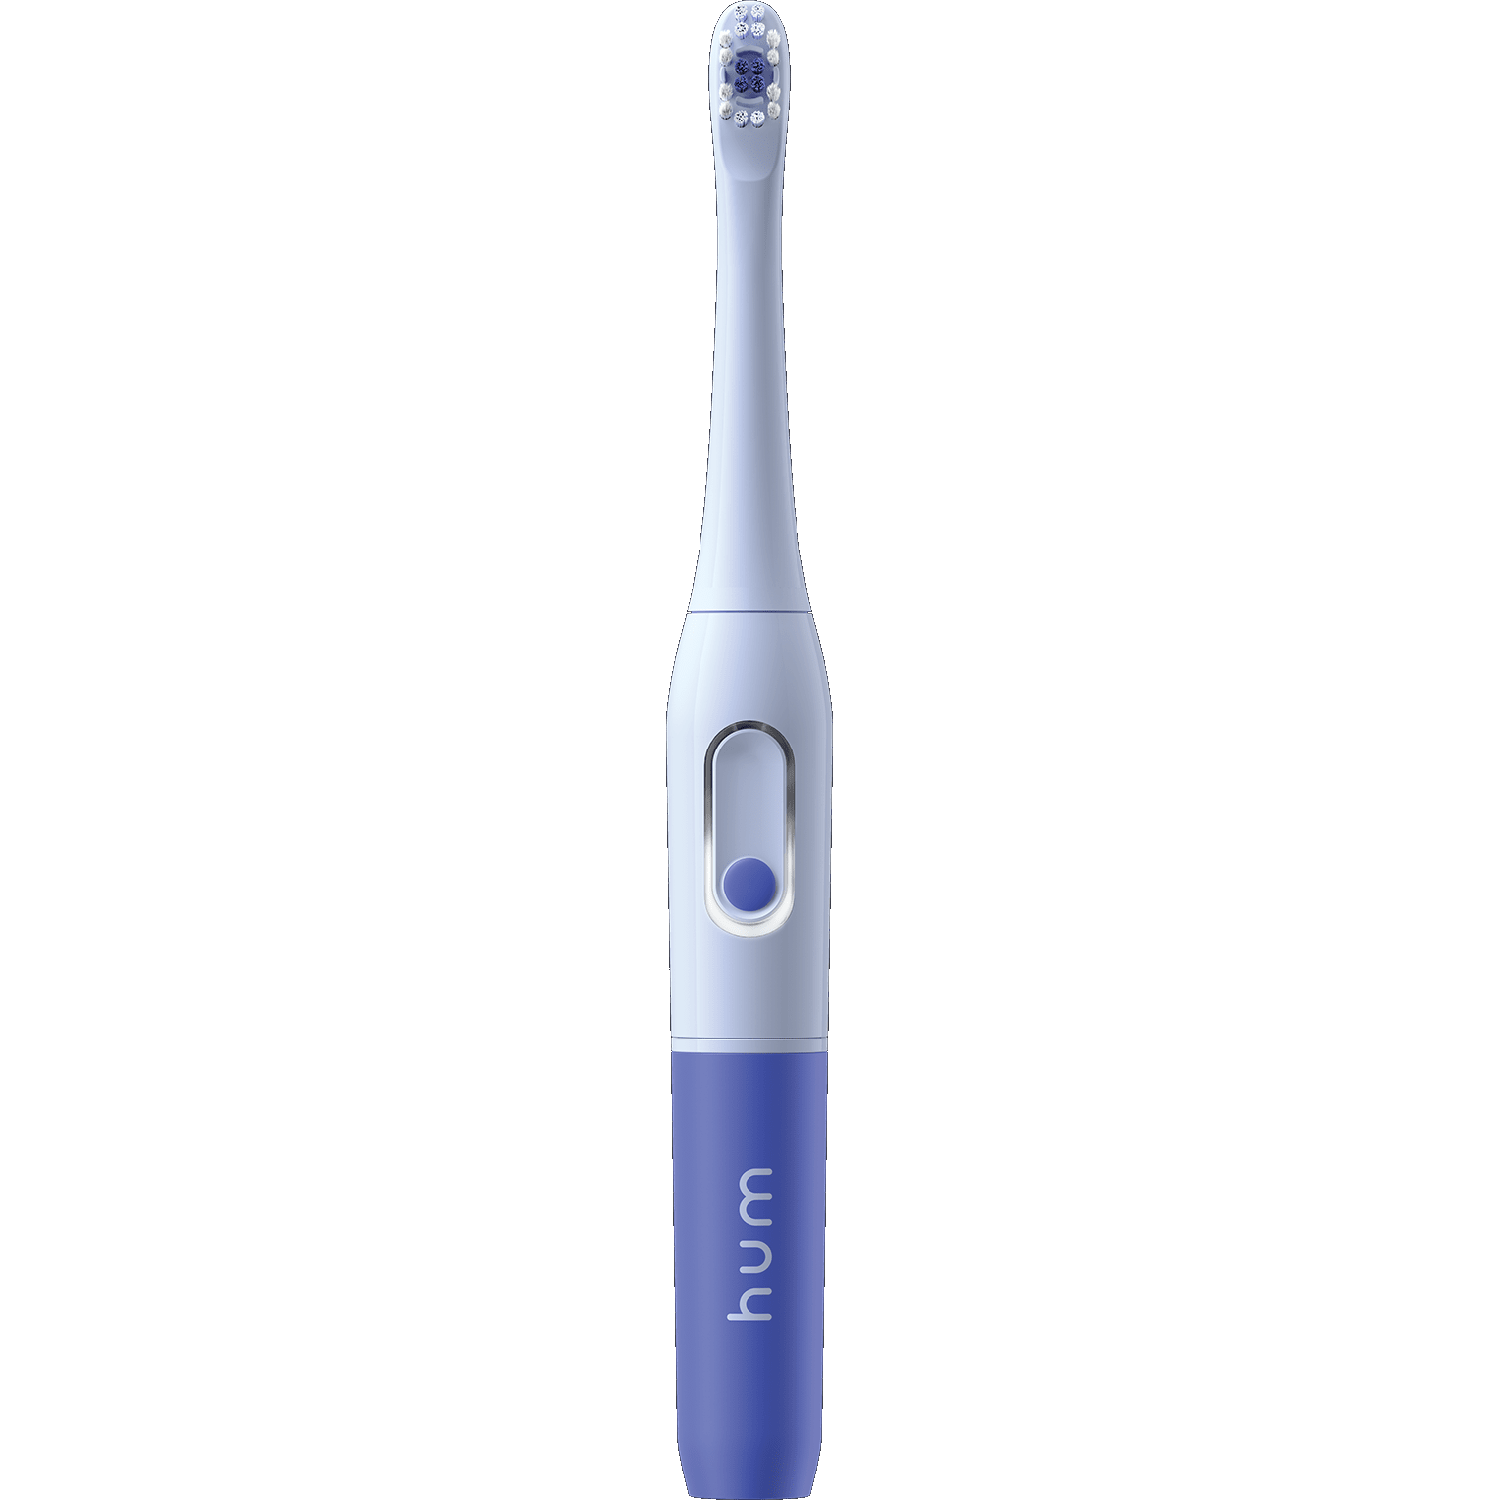 Colgate Hum Smart Battery Powered Toothbrush Color 9858 for sale online |  eBay